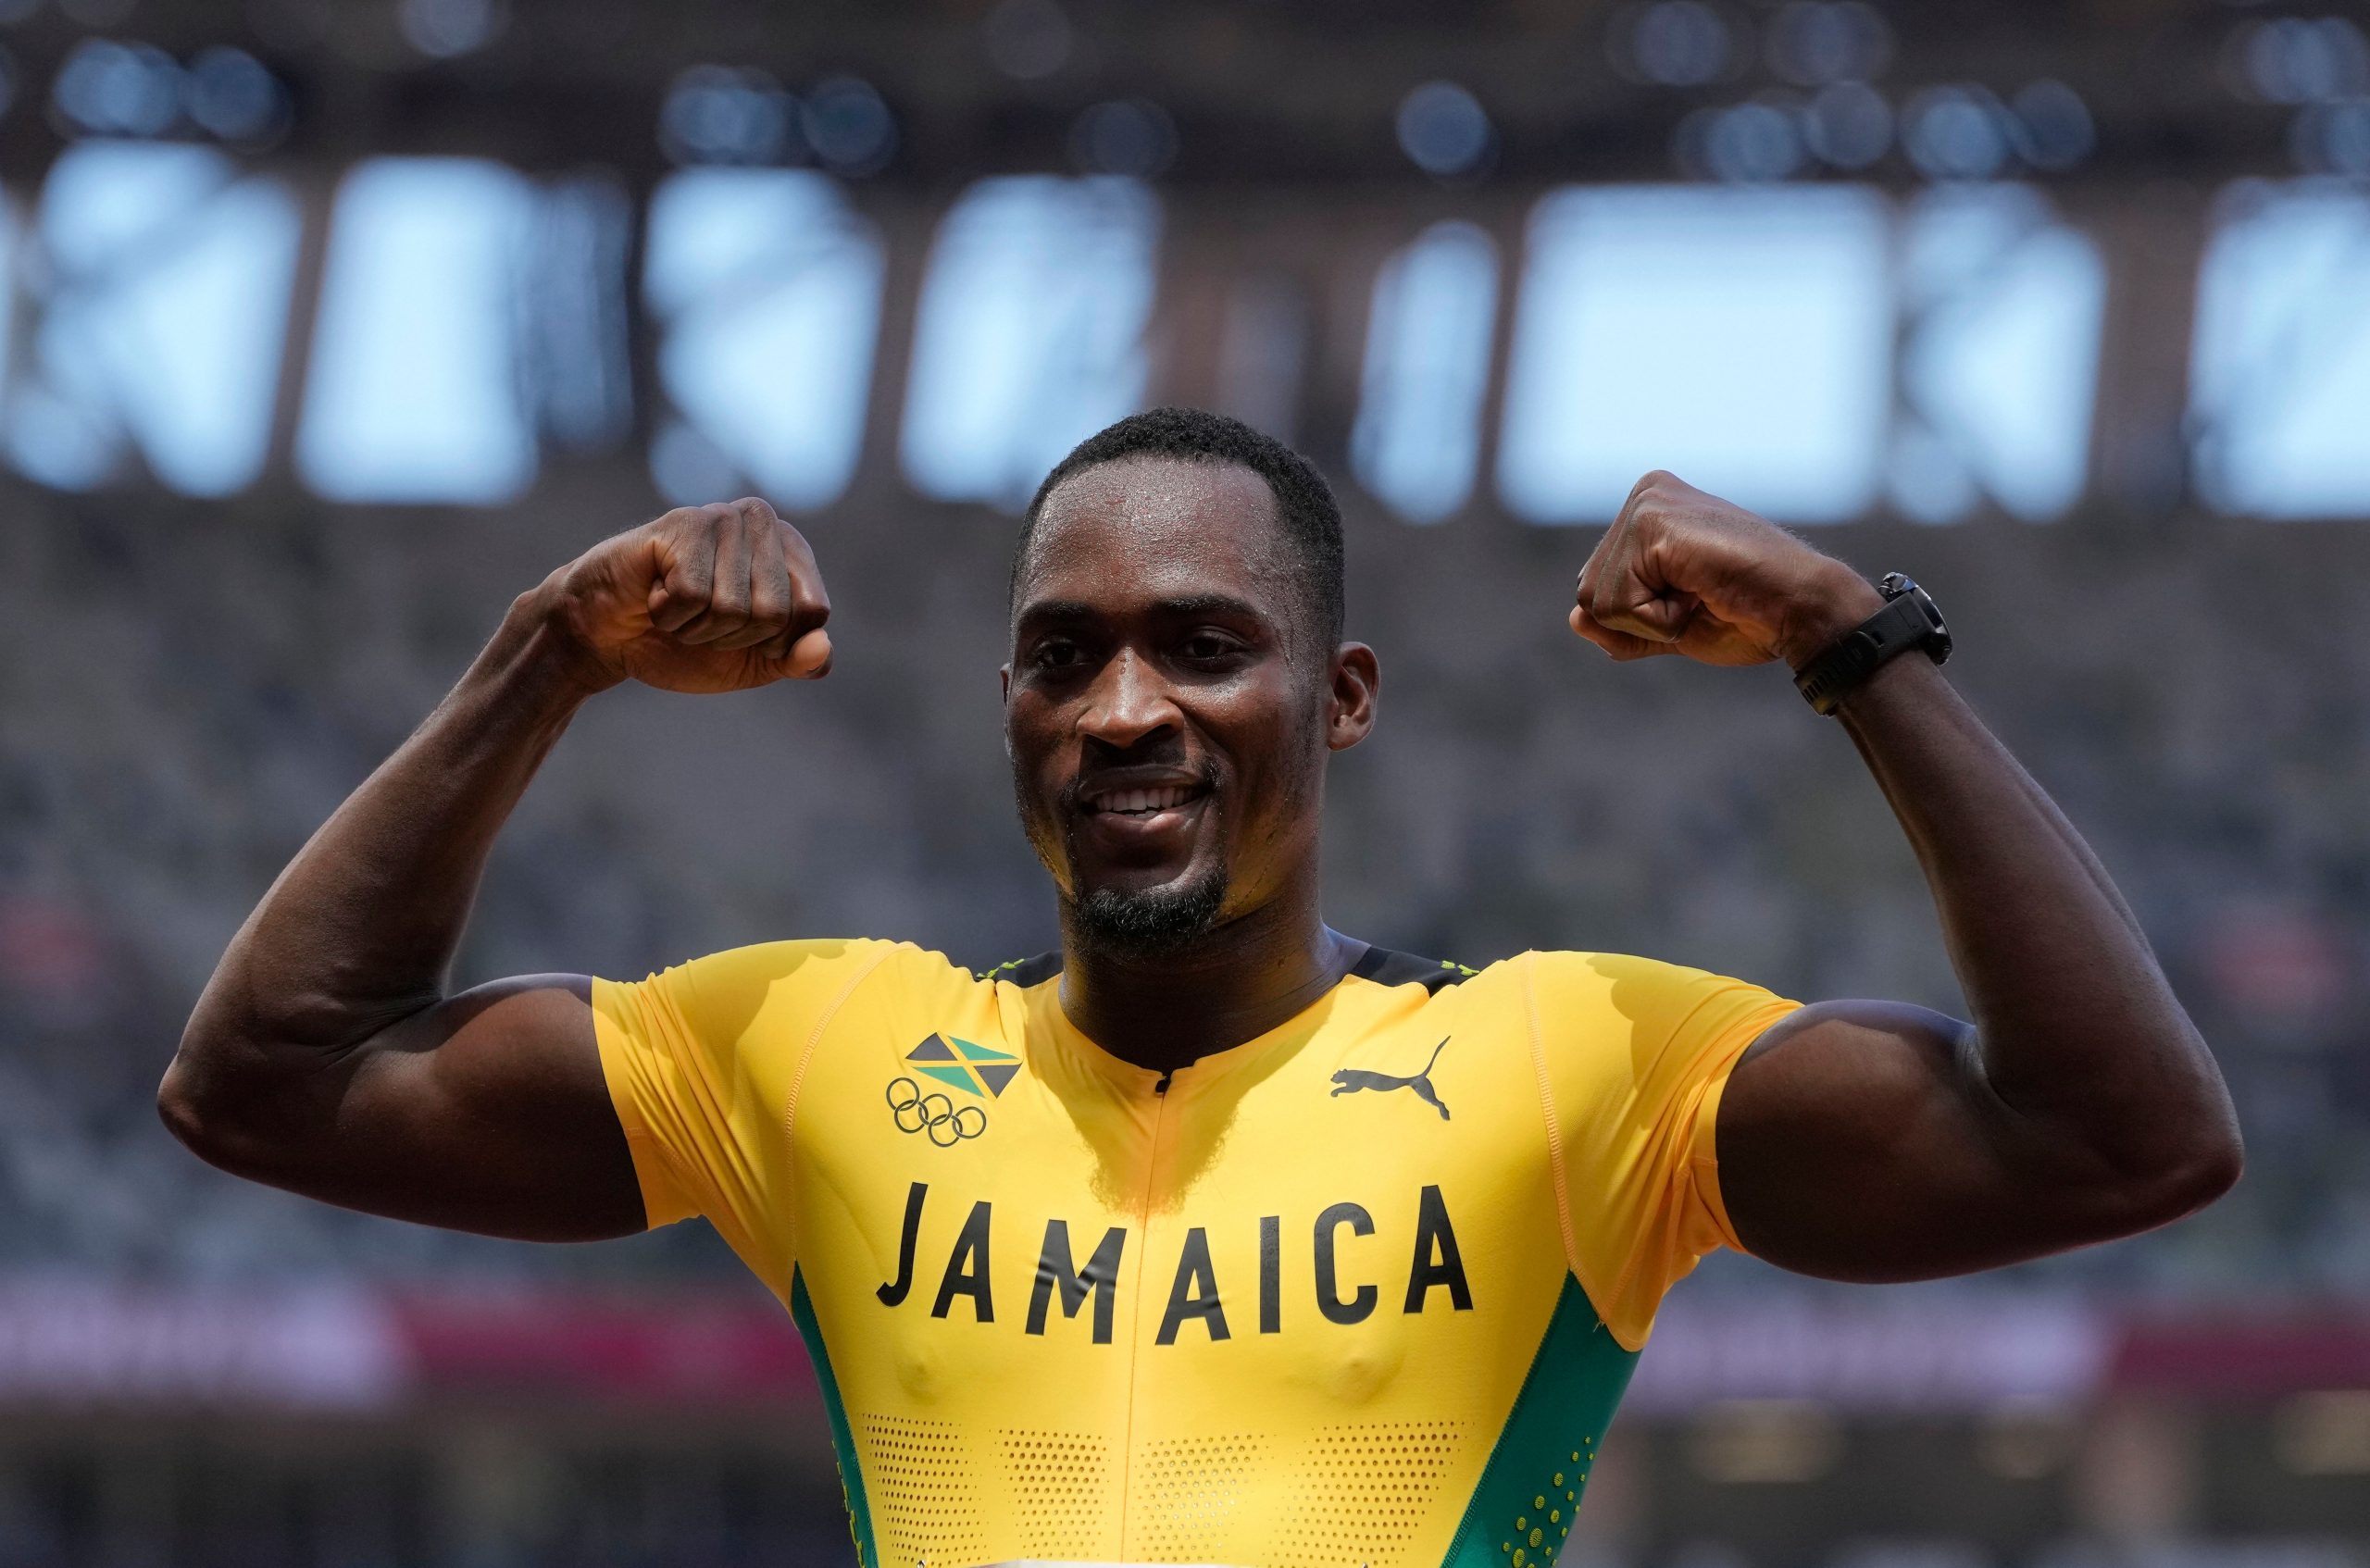 Sprinter Hansle Parchment won gold because of a stranger. Here is the story